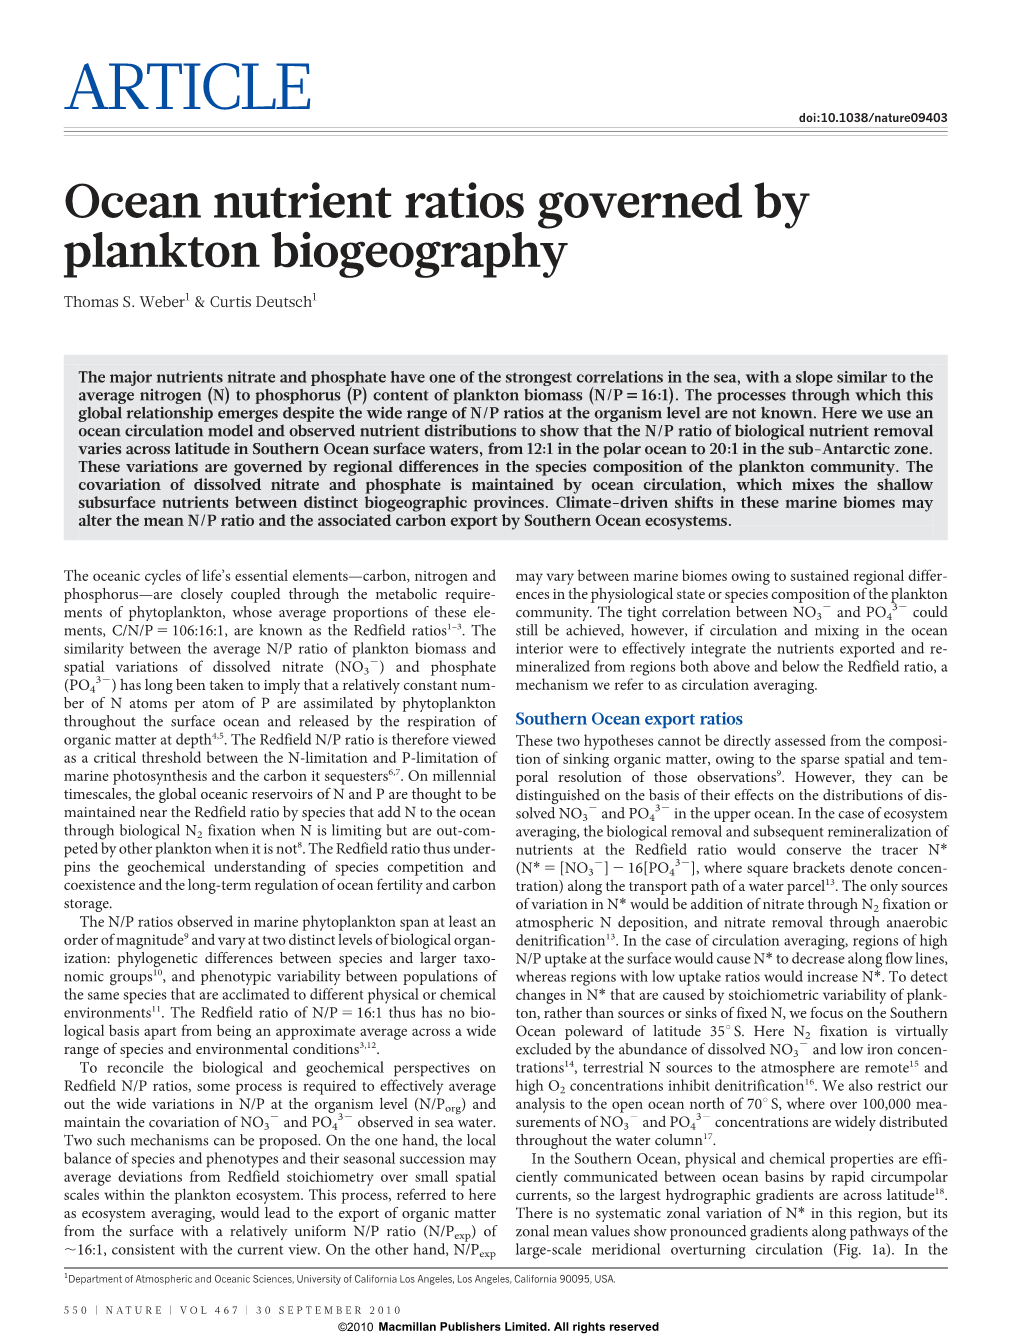 Ocean Nutrient Ratios Governed by Plankton Biogeography